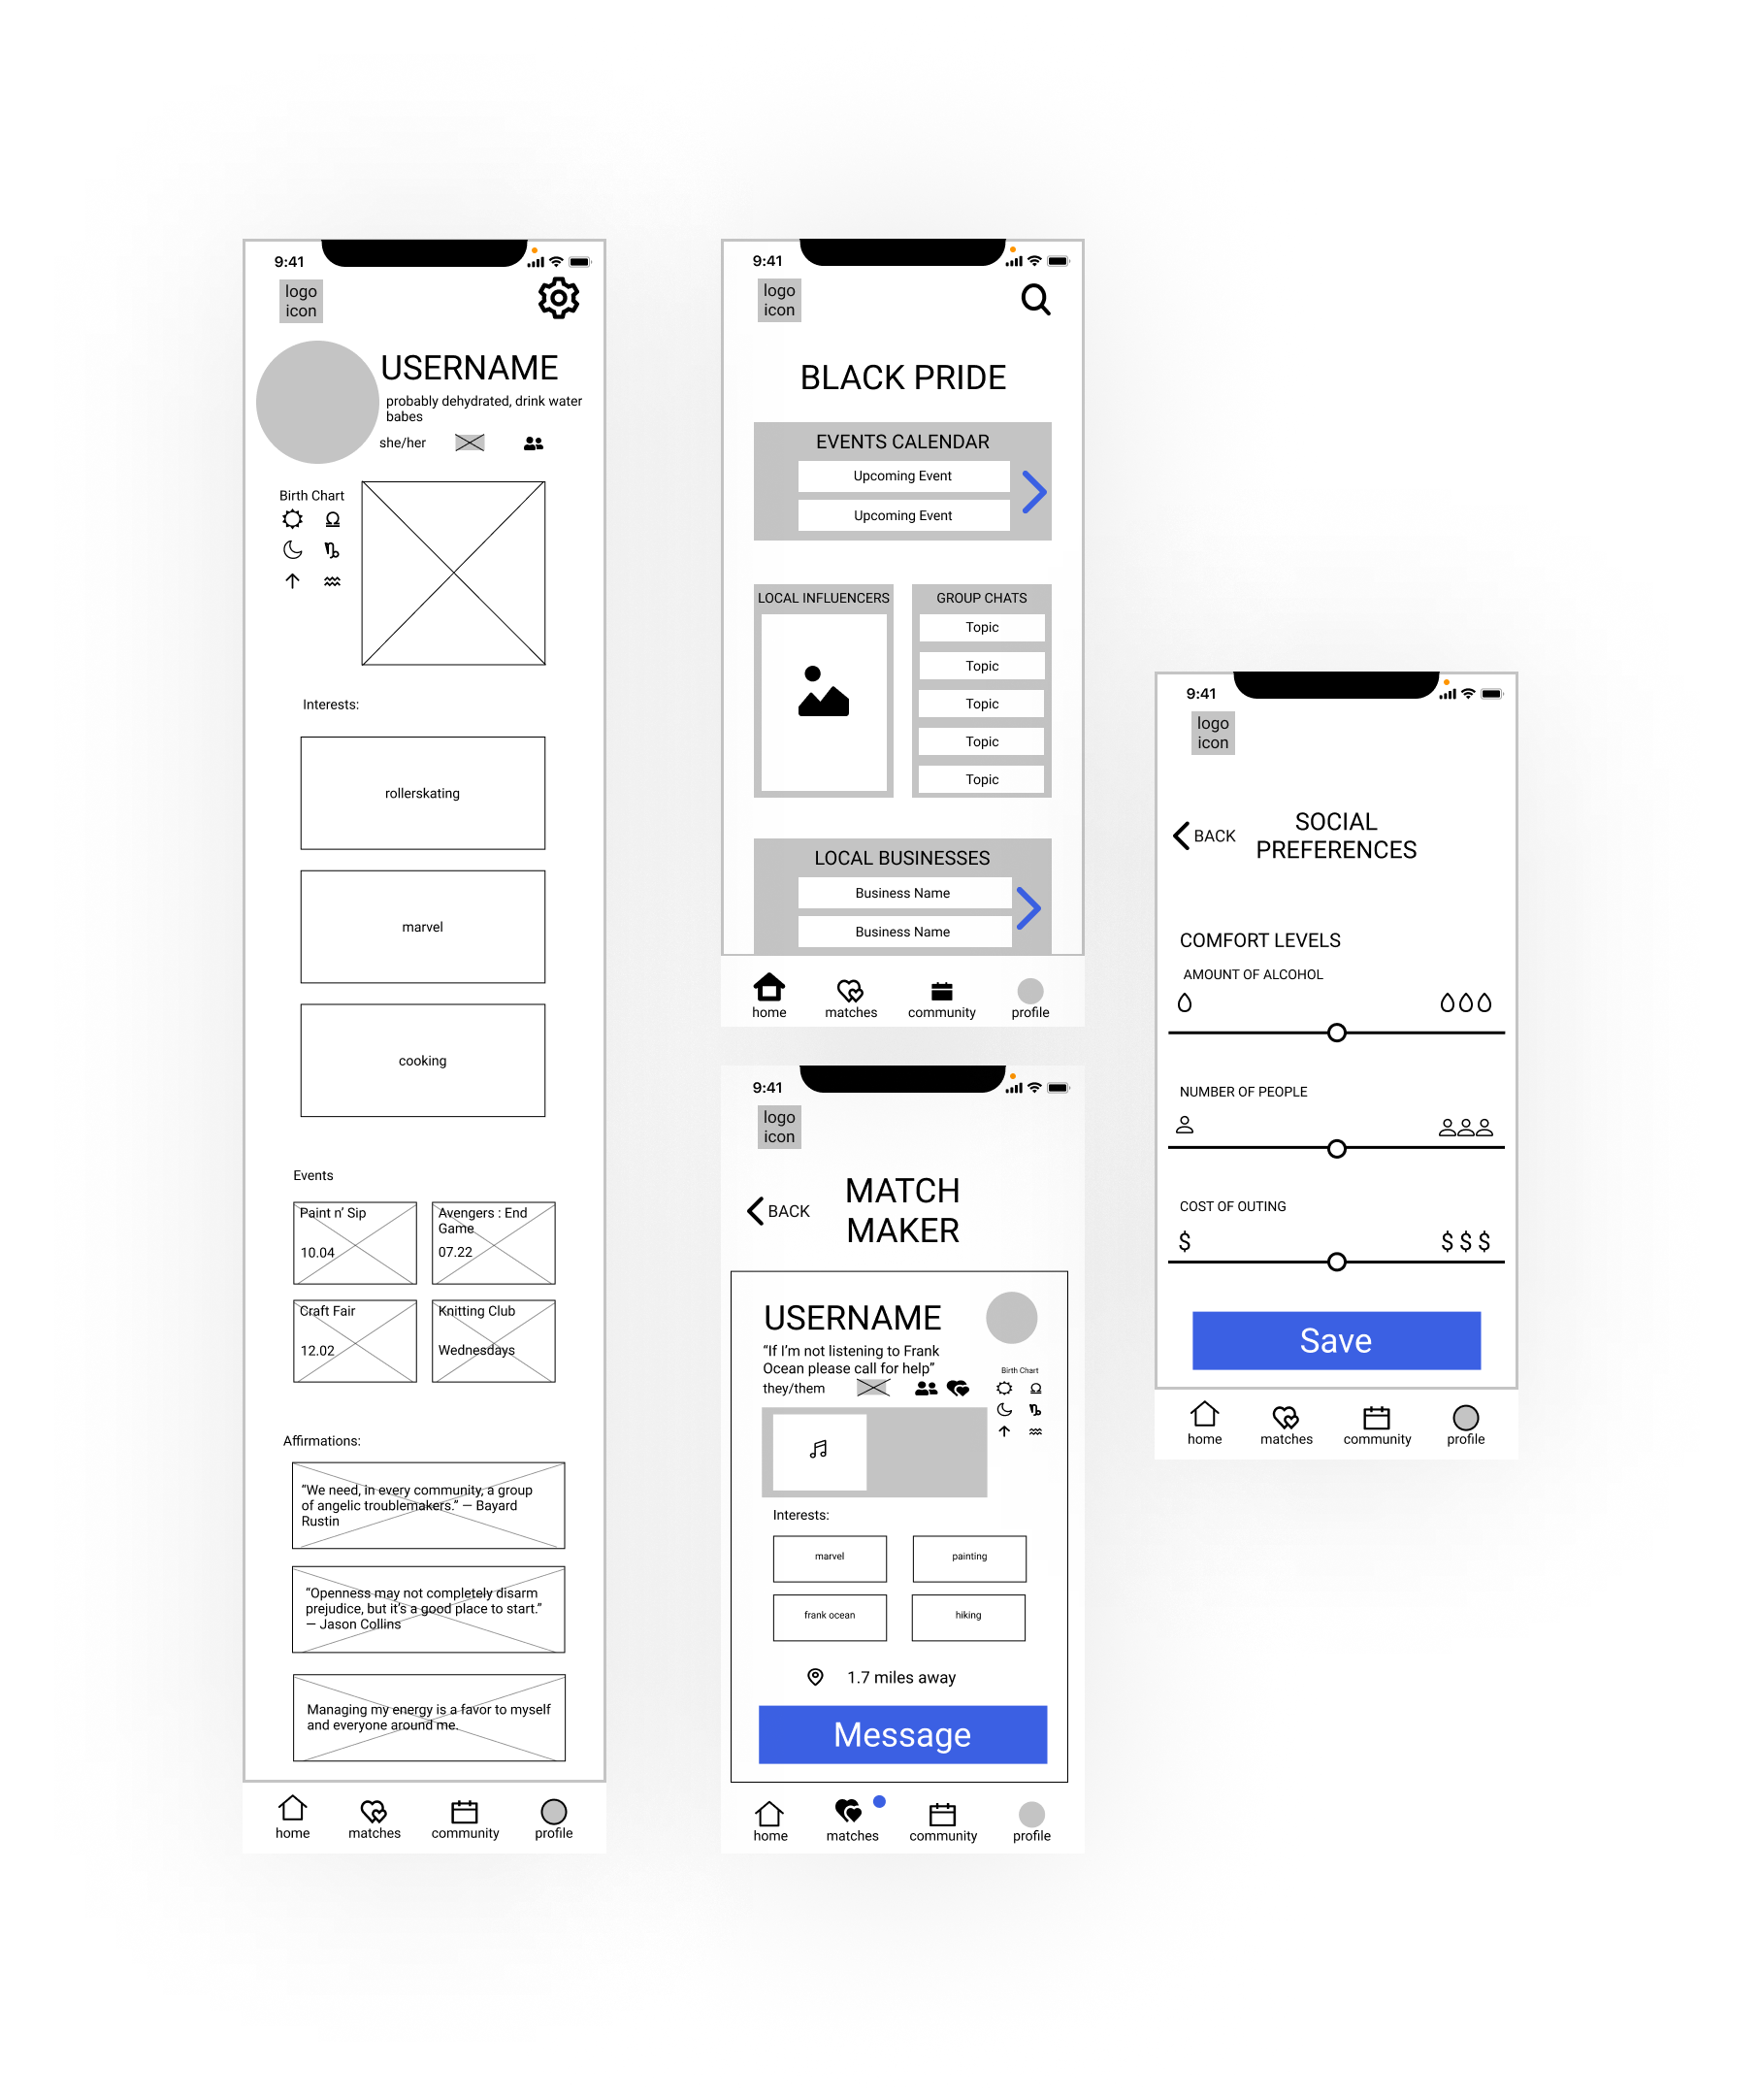 UX Design: Previews of the wireframes that are most strongly connected to the final product. Having these as a guiding blueprint made my final UI Design faster and more consistent.